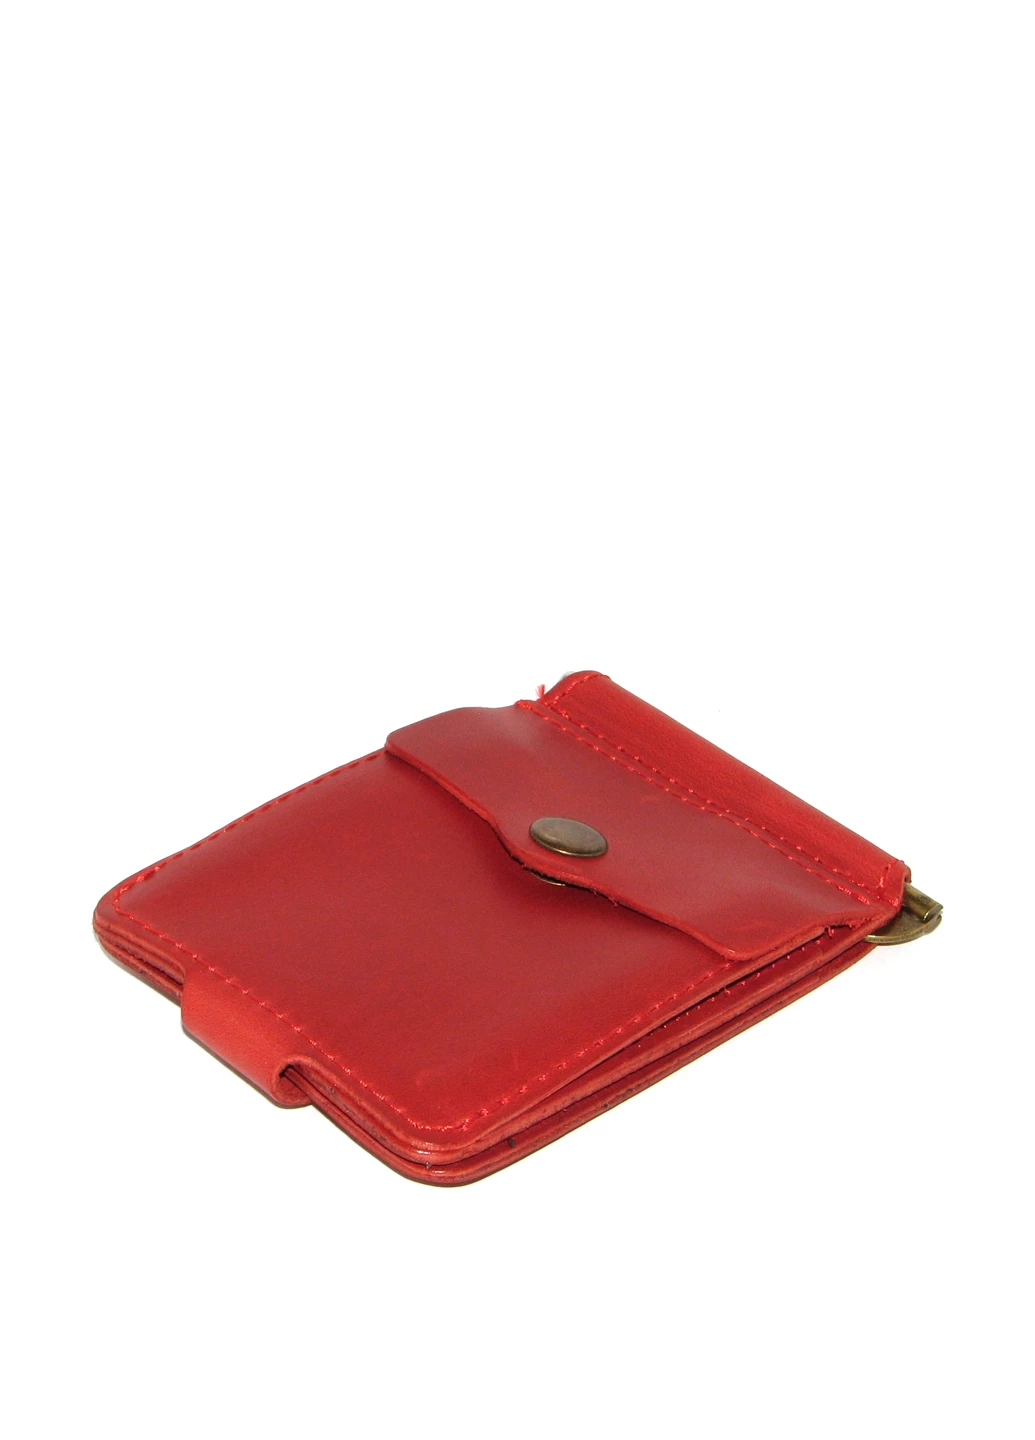 Money clip DNK Leather with small pocket red